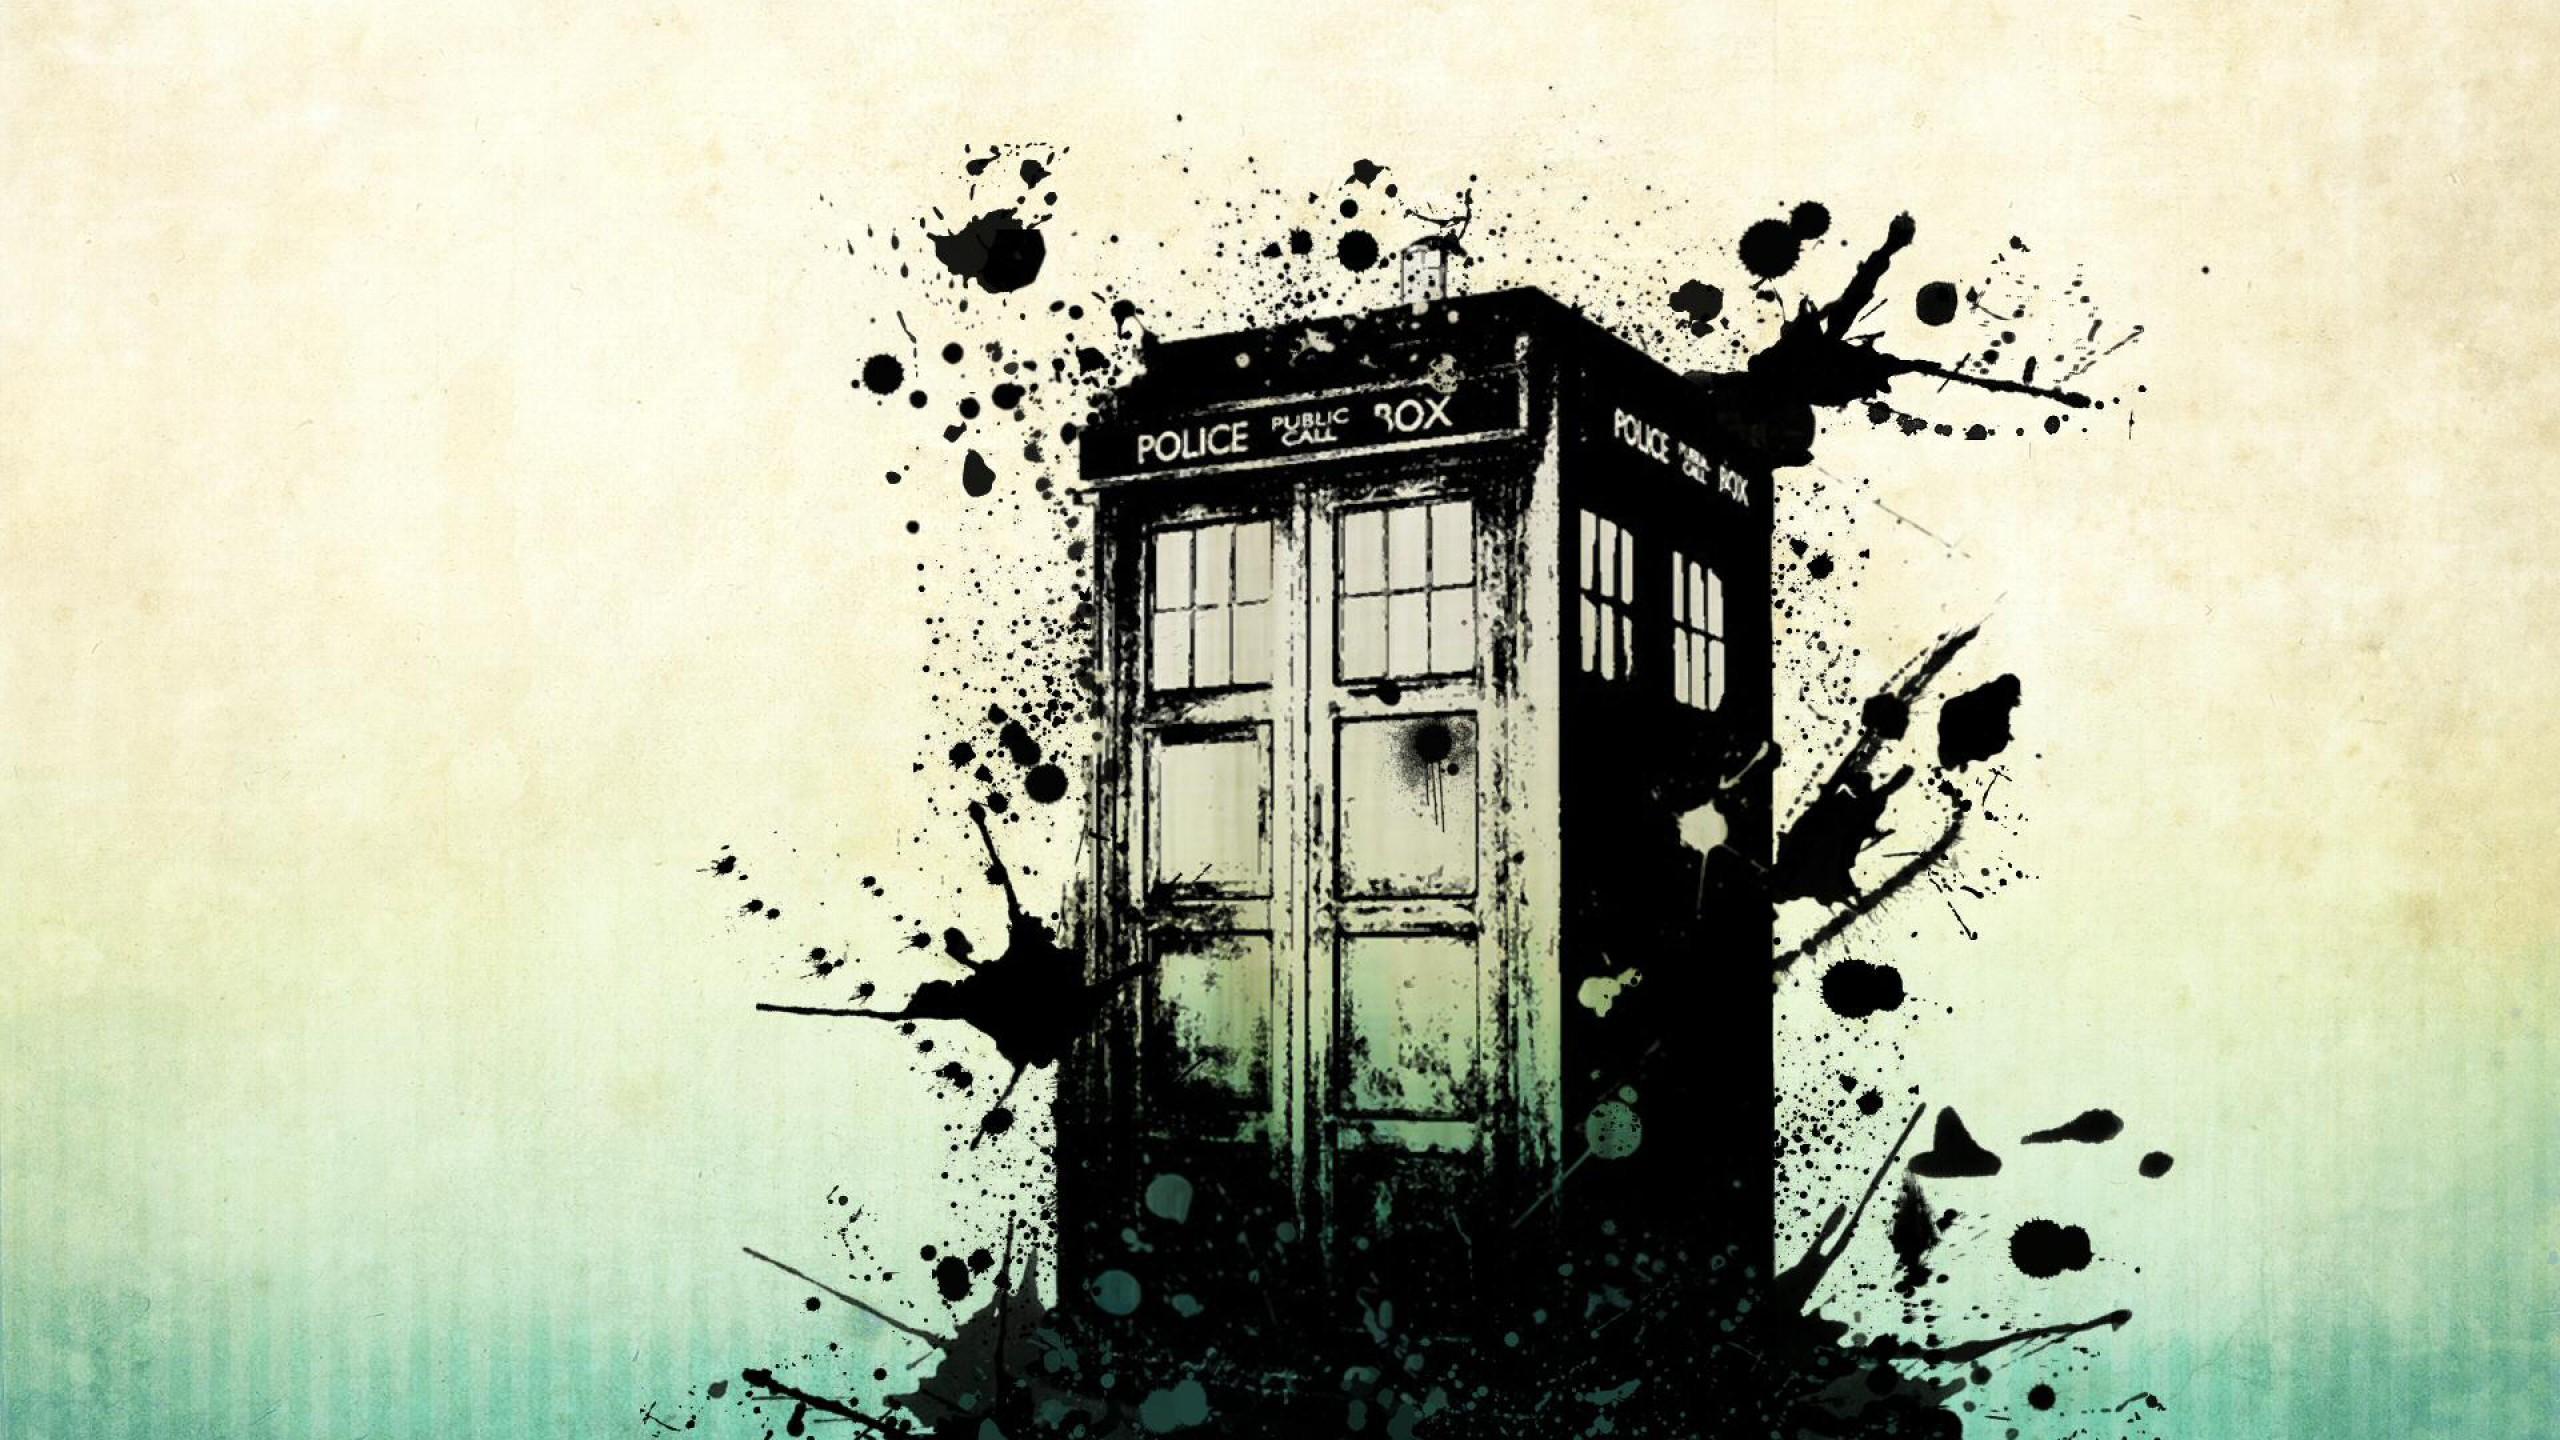 Abstract Doctor Who Wallpaper 20487 2560x1440 px